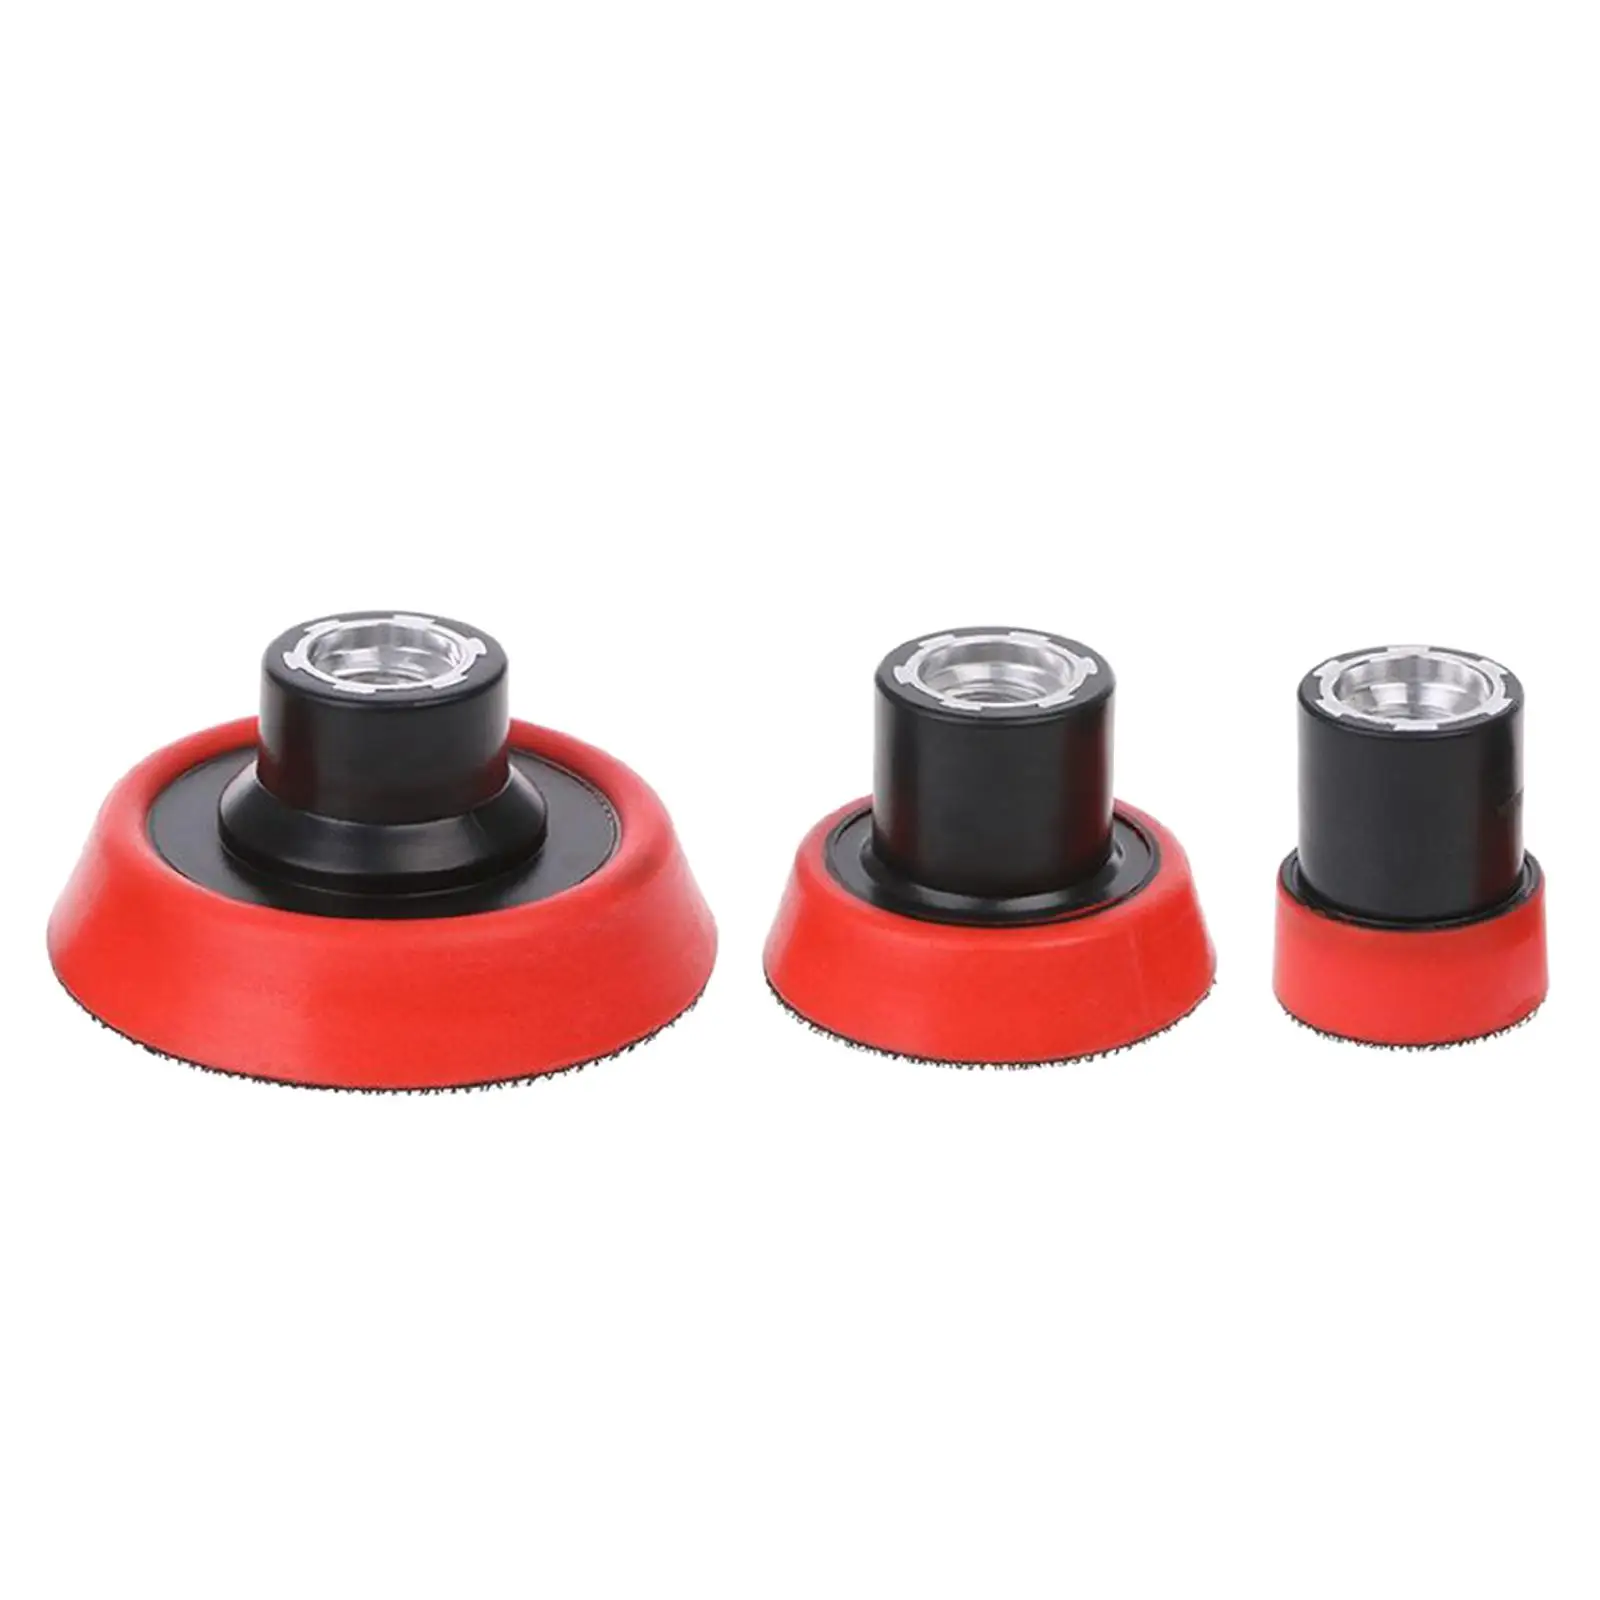 3 Pieces M14 Accs Buffering Durable Backing Plate Polisher for Polishing